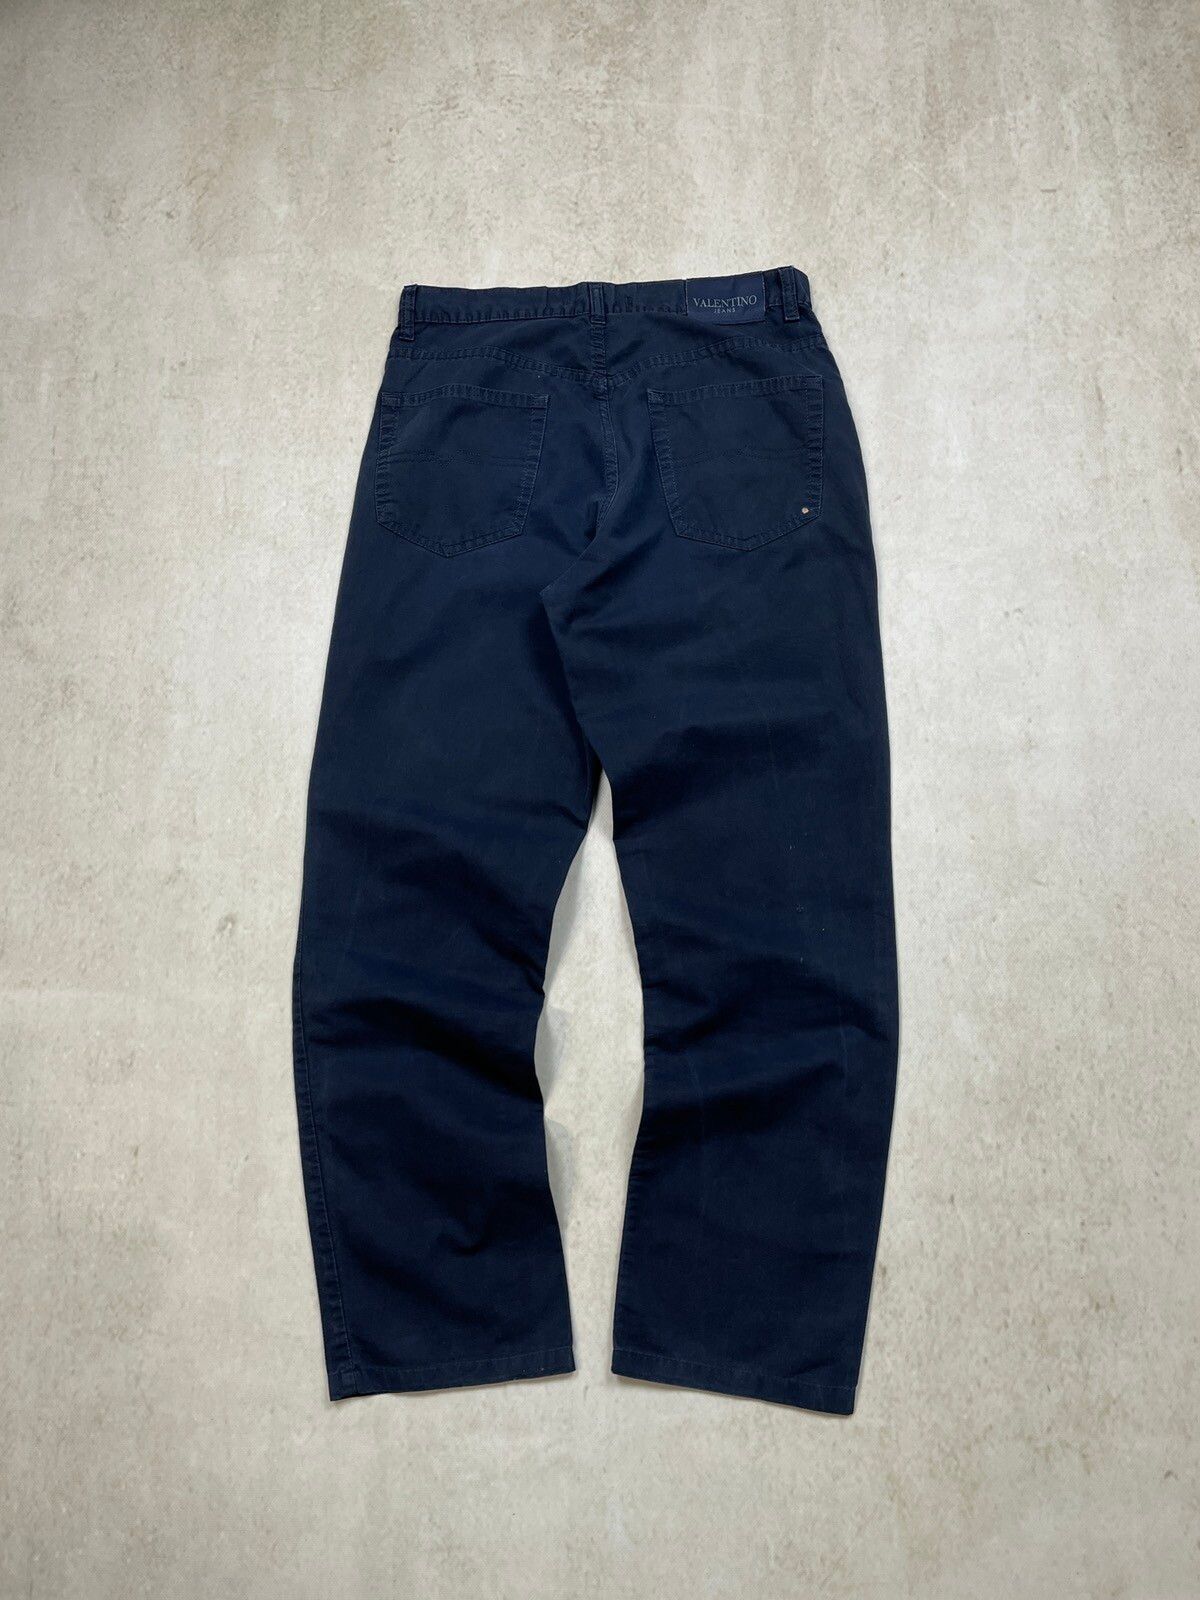 Pre-owned Valentino Cool  Jeans Casul Pants 03749611 In Navy